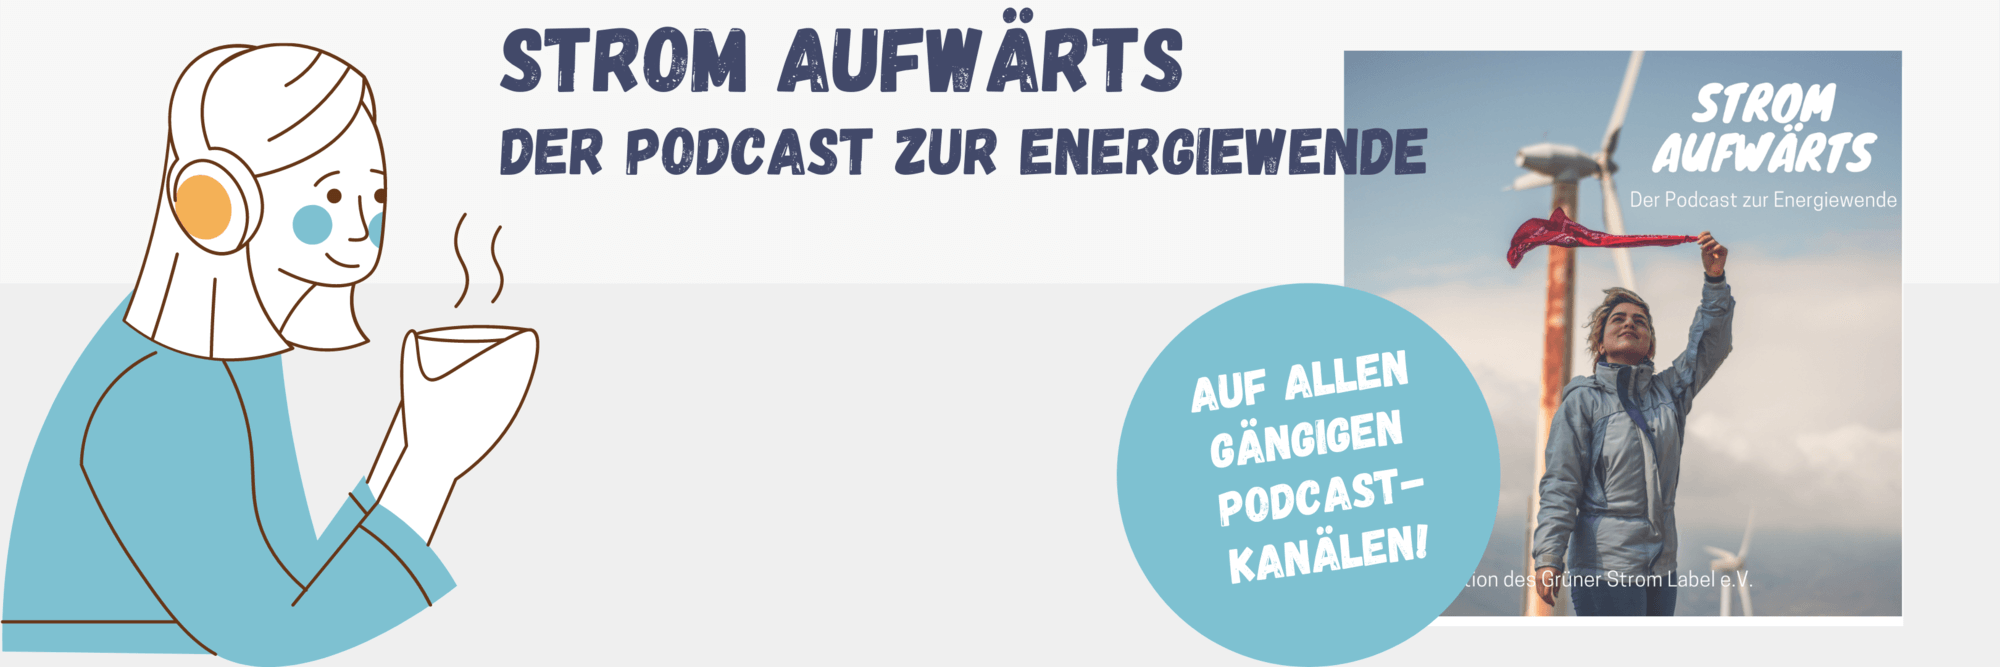 Title banner of the podcast of Gruener Strom label "Strom aufwaerts